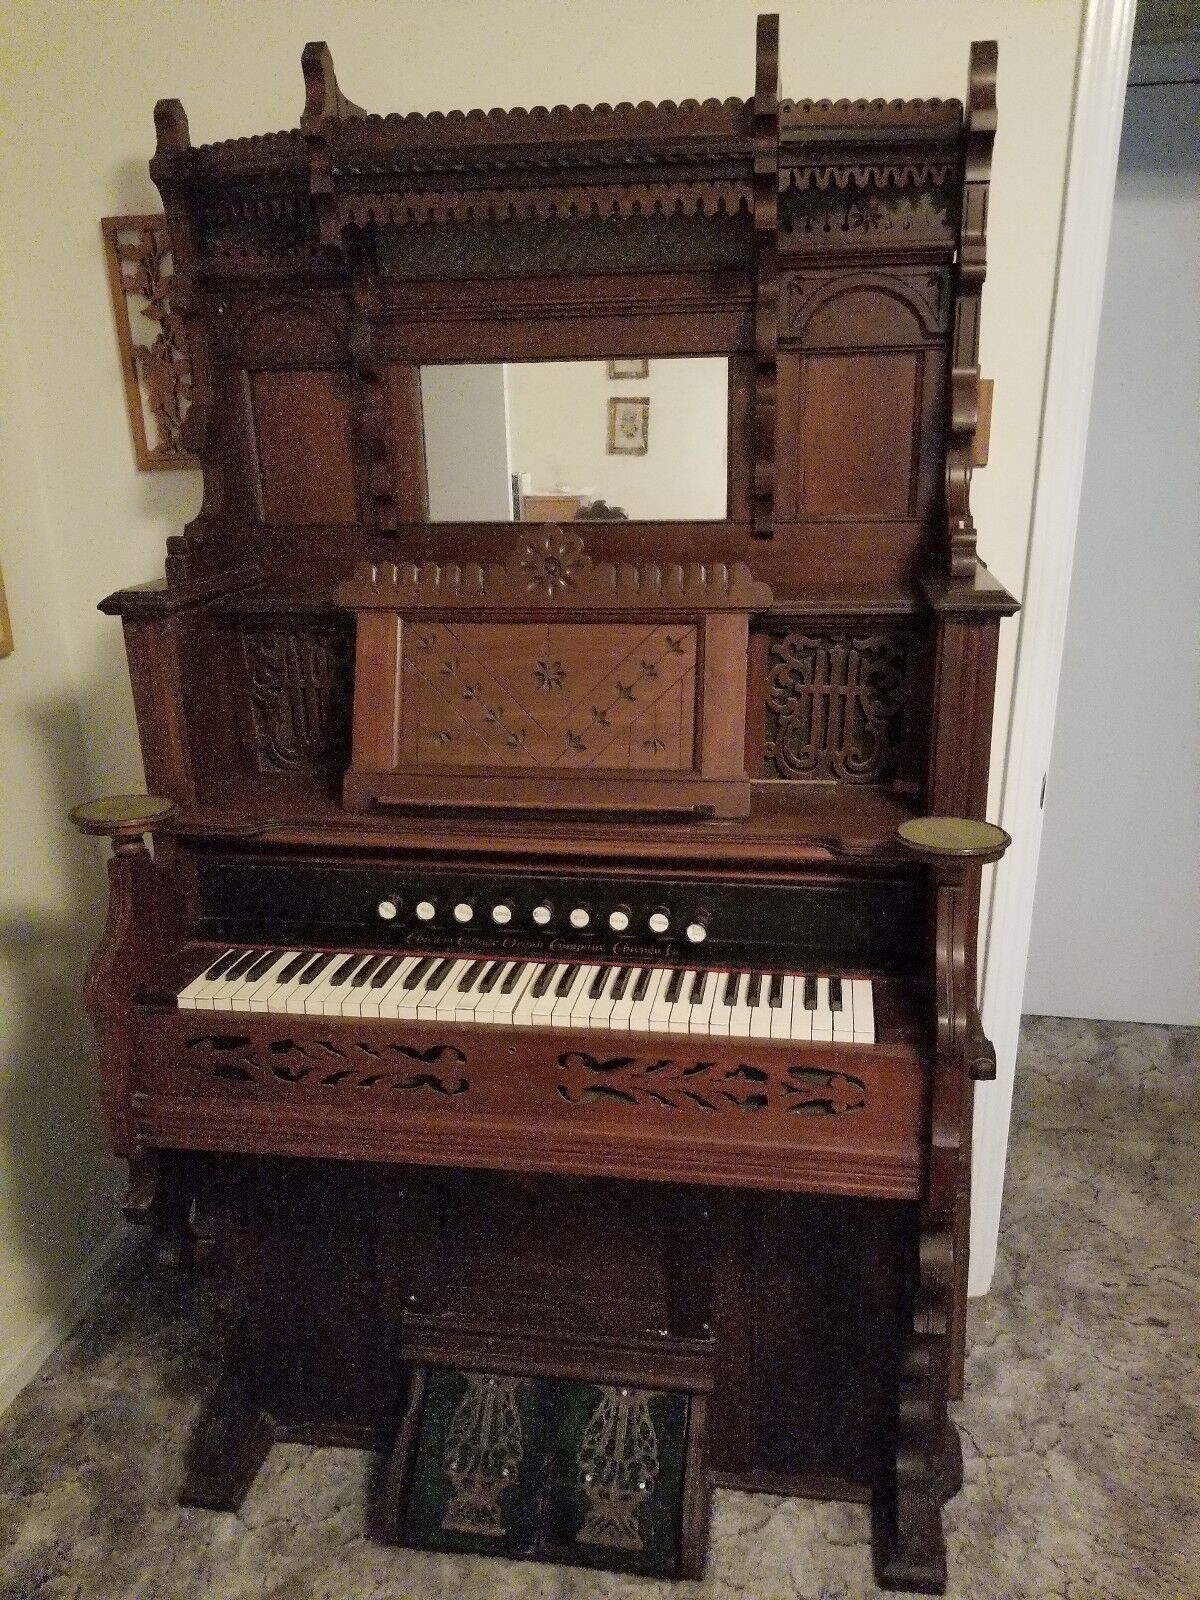 Antique 1879 Victorian Chicago Cottage Company pump organ intricate, ornate